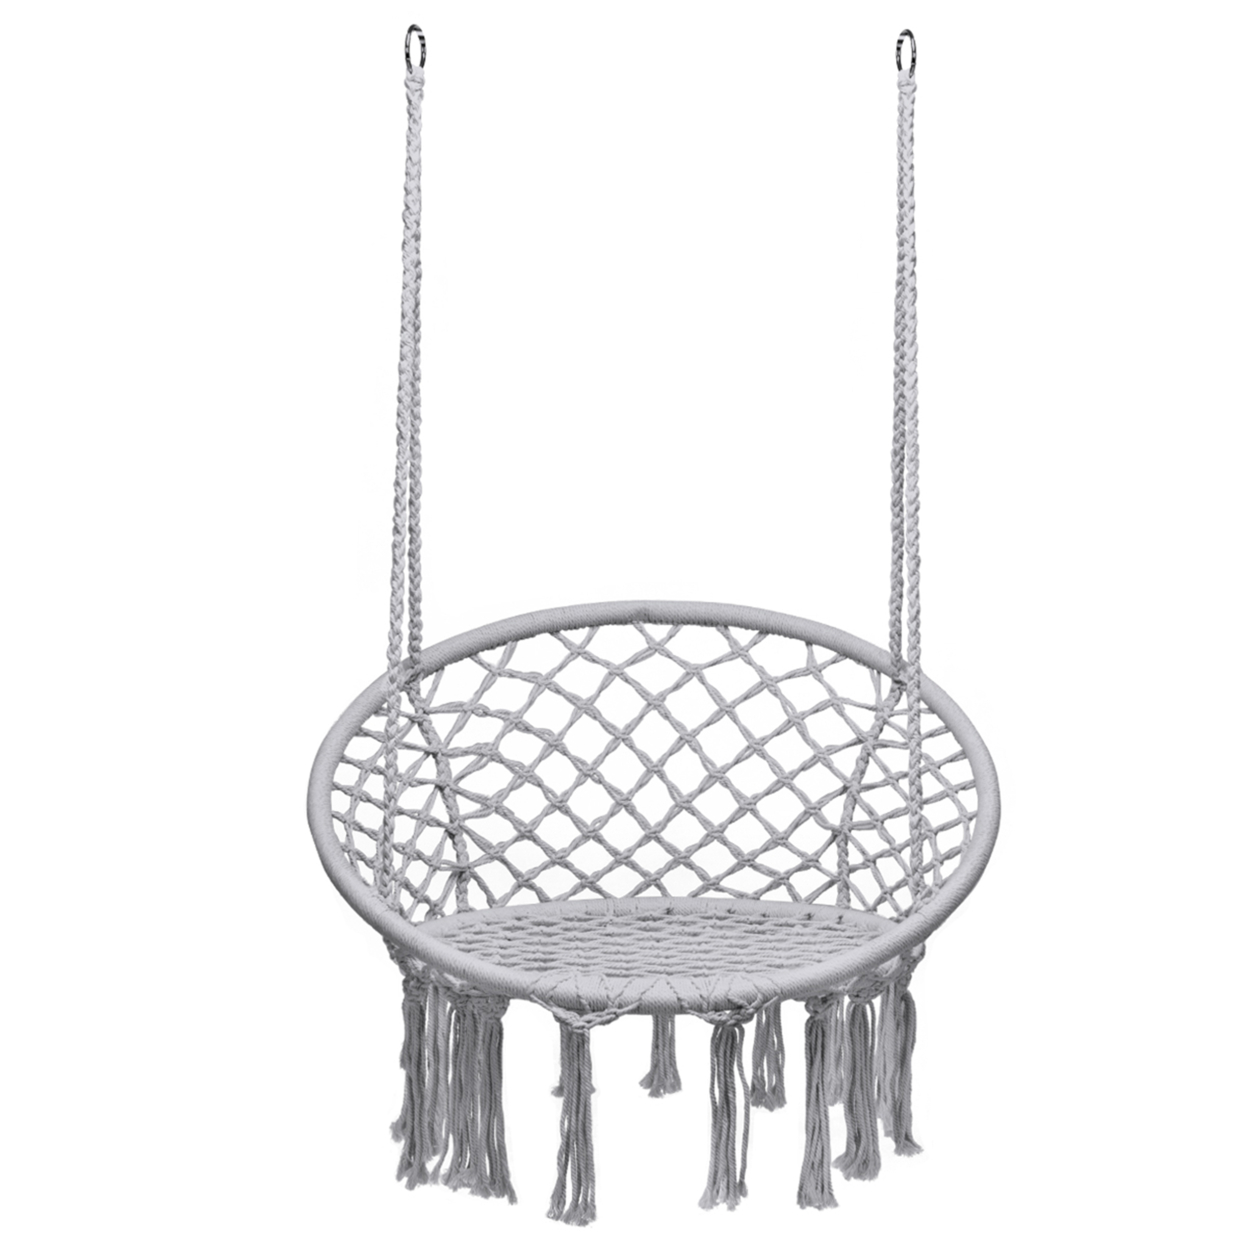 Gymax Hammock Chair Hanging Cotton Rope Macrame Swing Chair Indoor Outdoor - Gray